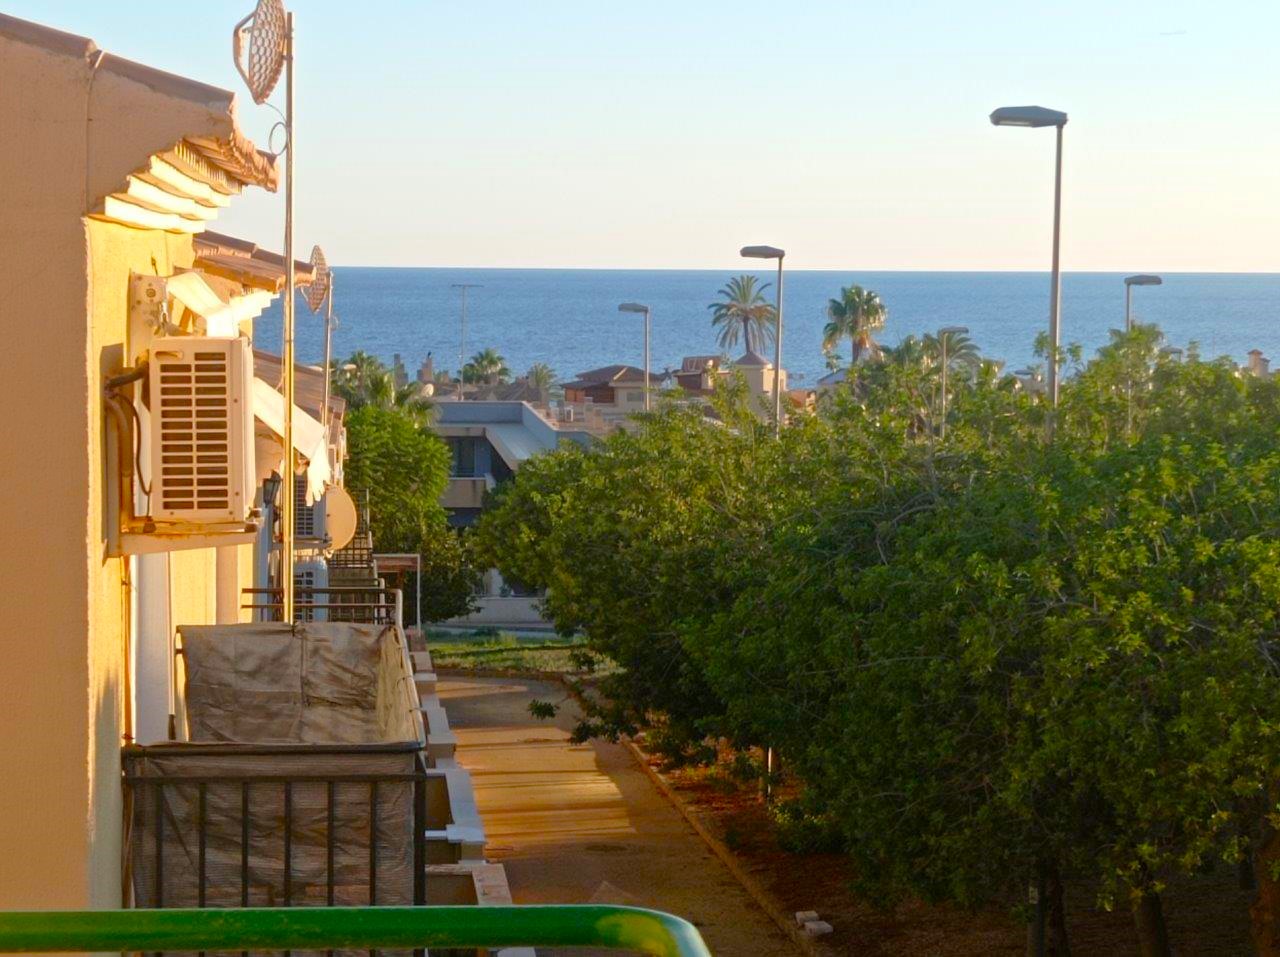 1323. DUPLEX ESQUINA CHARMING TOWNHOUSE 2BED 2wc COMMUNAL POOL AND SOME SEA VIEWS – ISLA PLANA